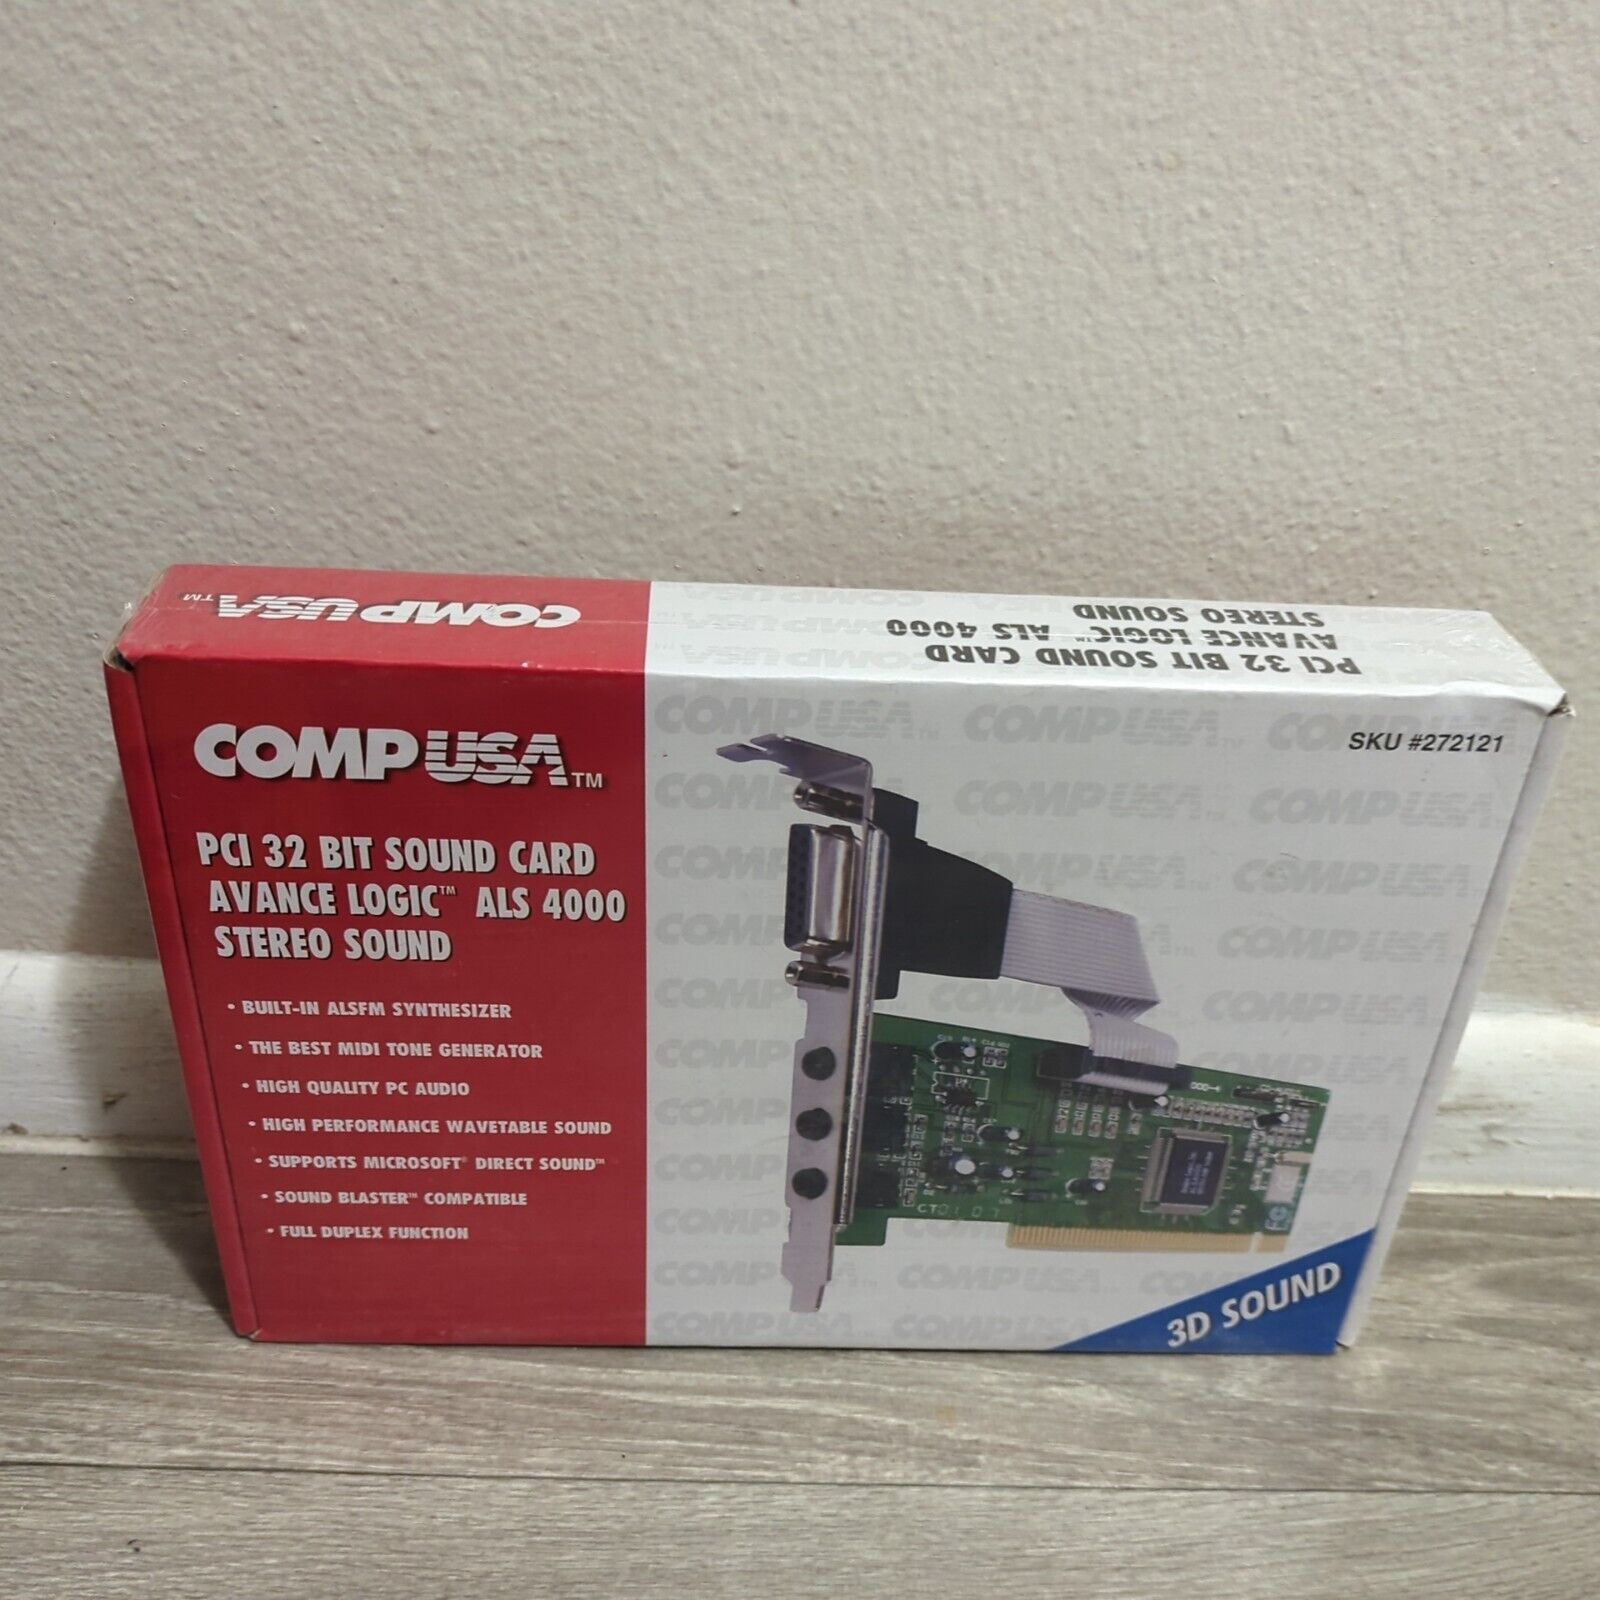 CompUSA Management PC 32 Sound Card. Advance Logic ALS 4000 stereo sound. New. . Available Now for 36.95